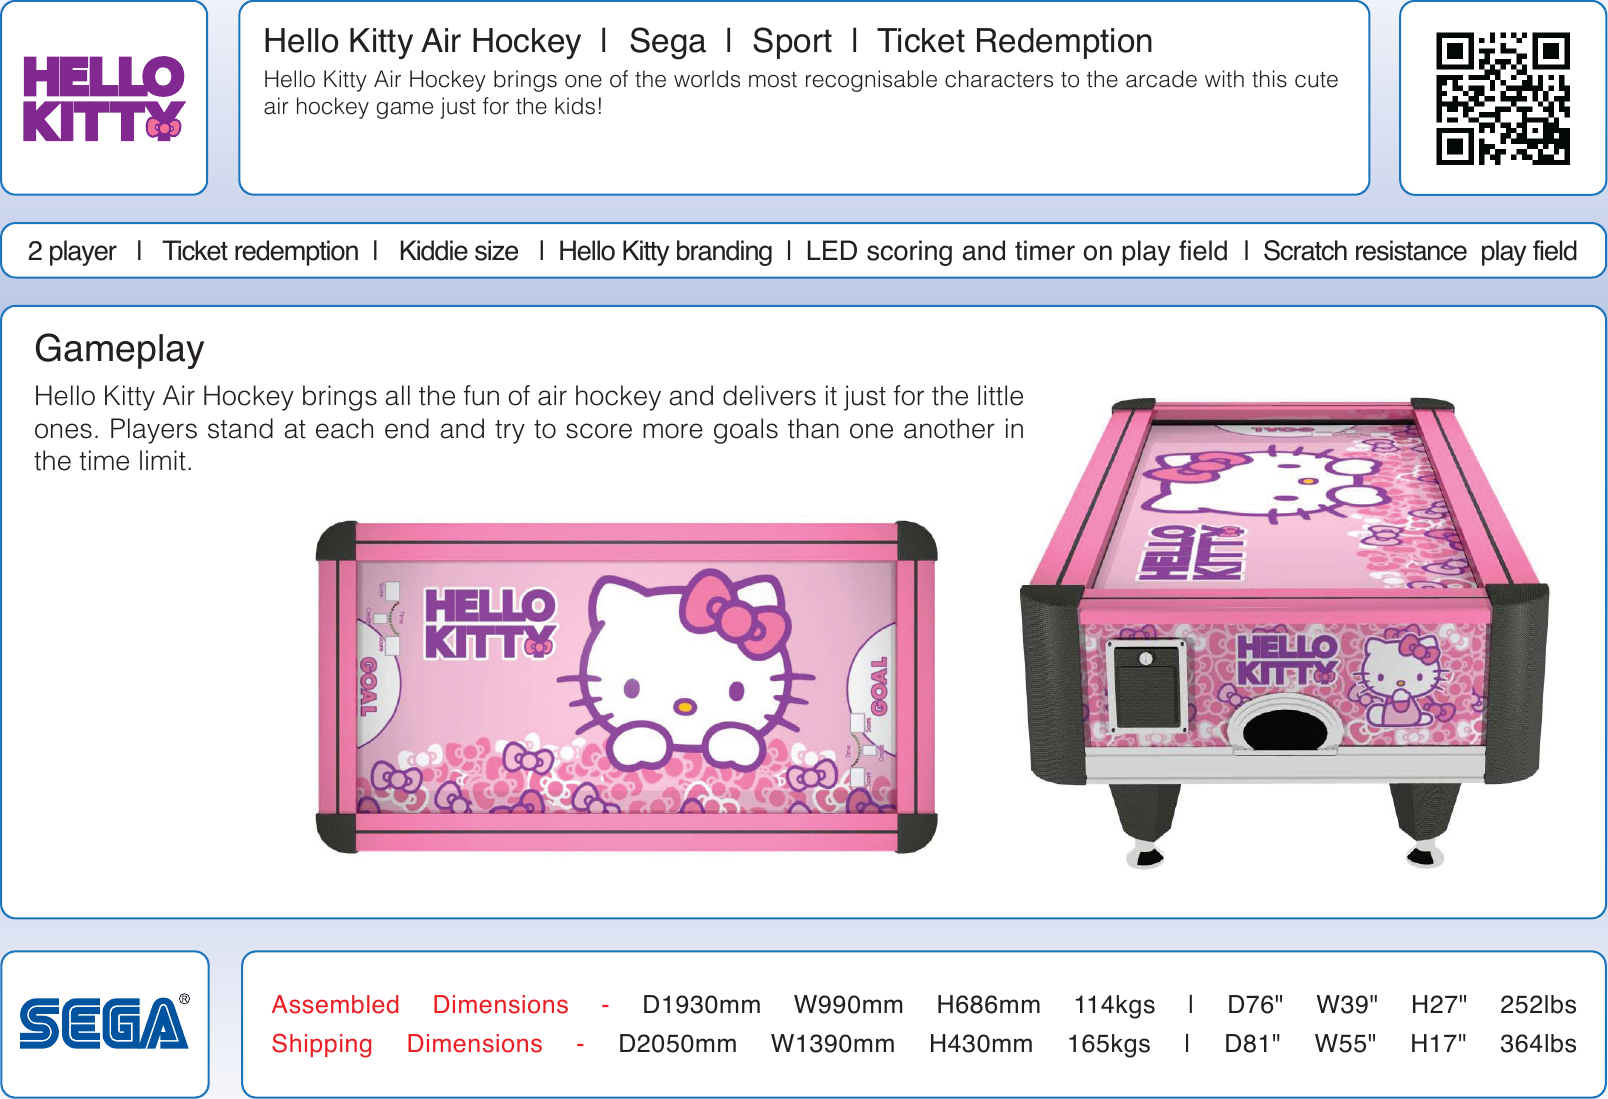 Page 2 of 2 - Arcade Hello Kitty Info Sheet User Manual